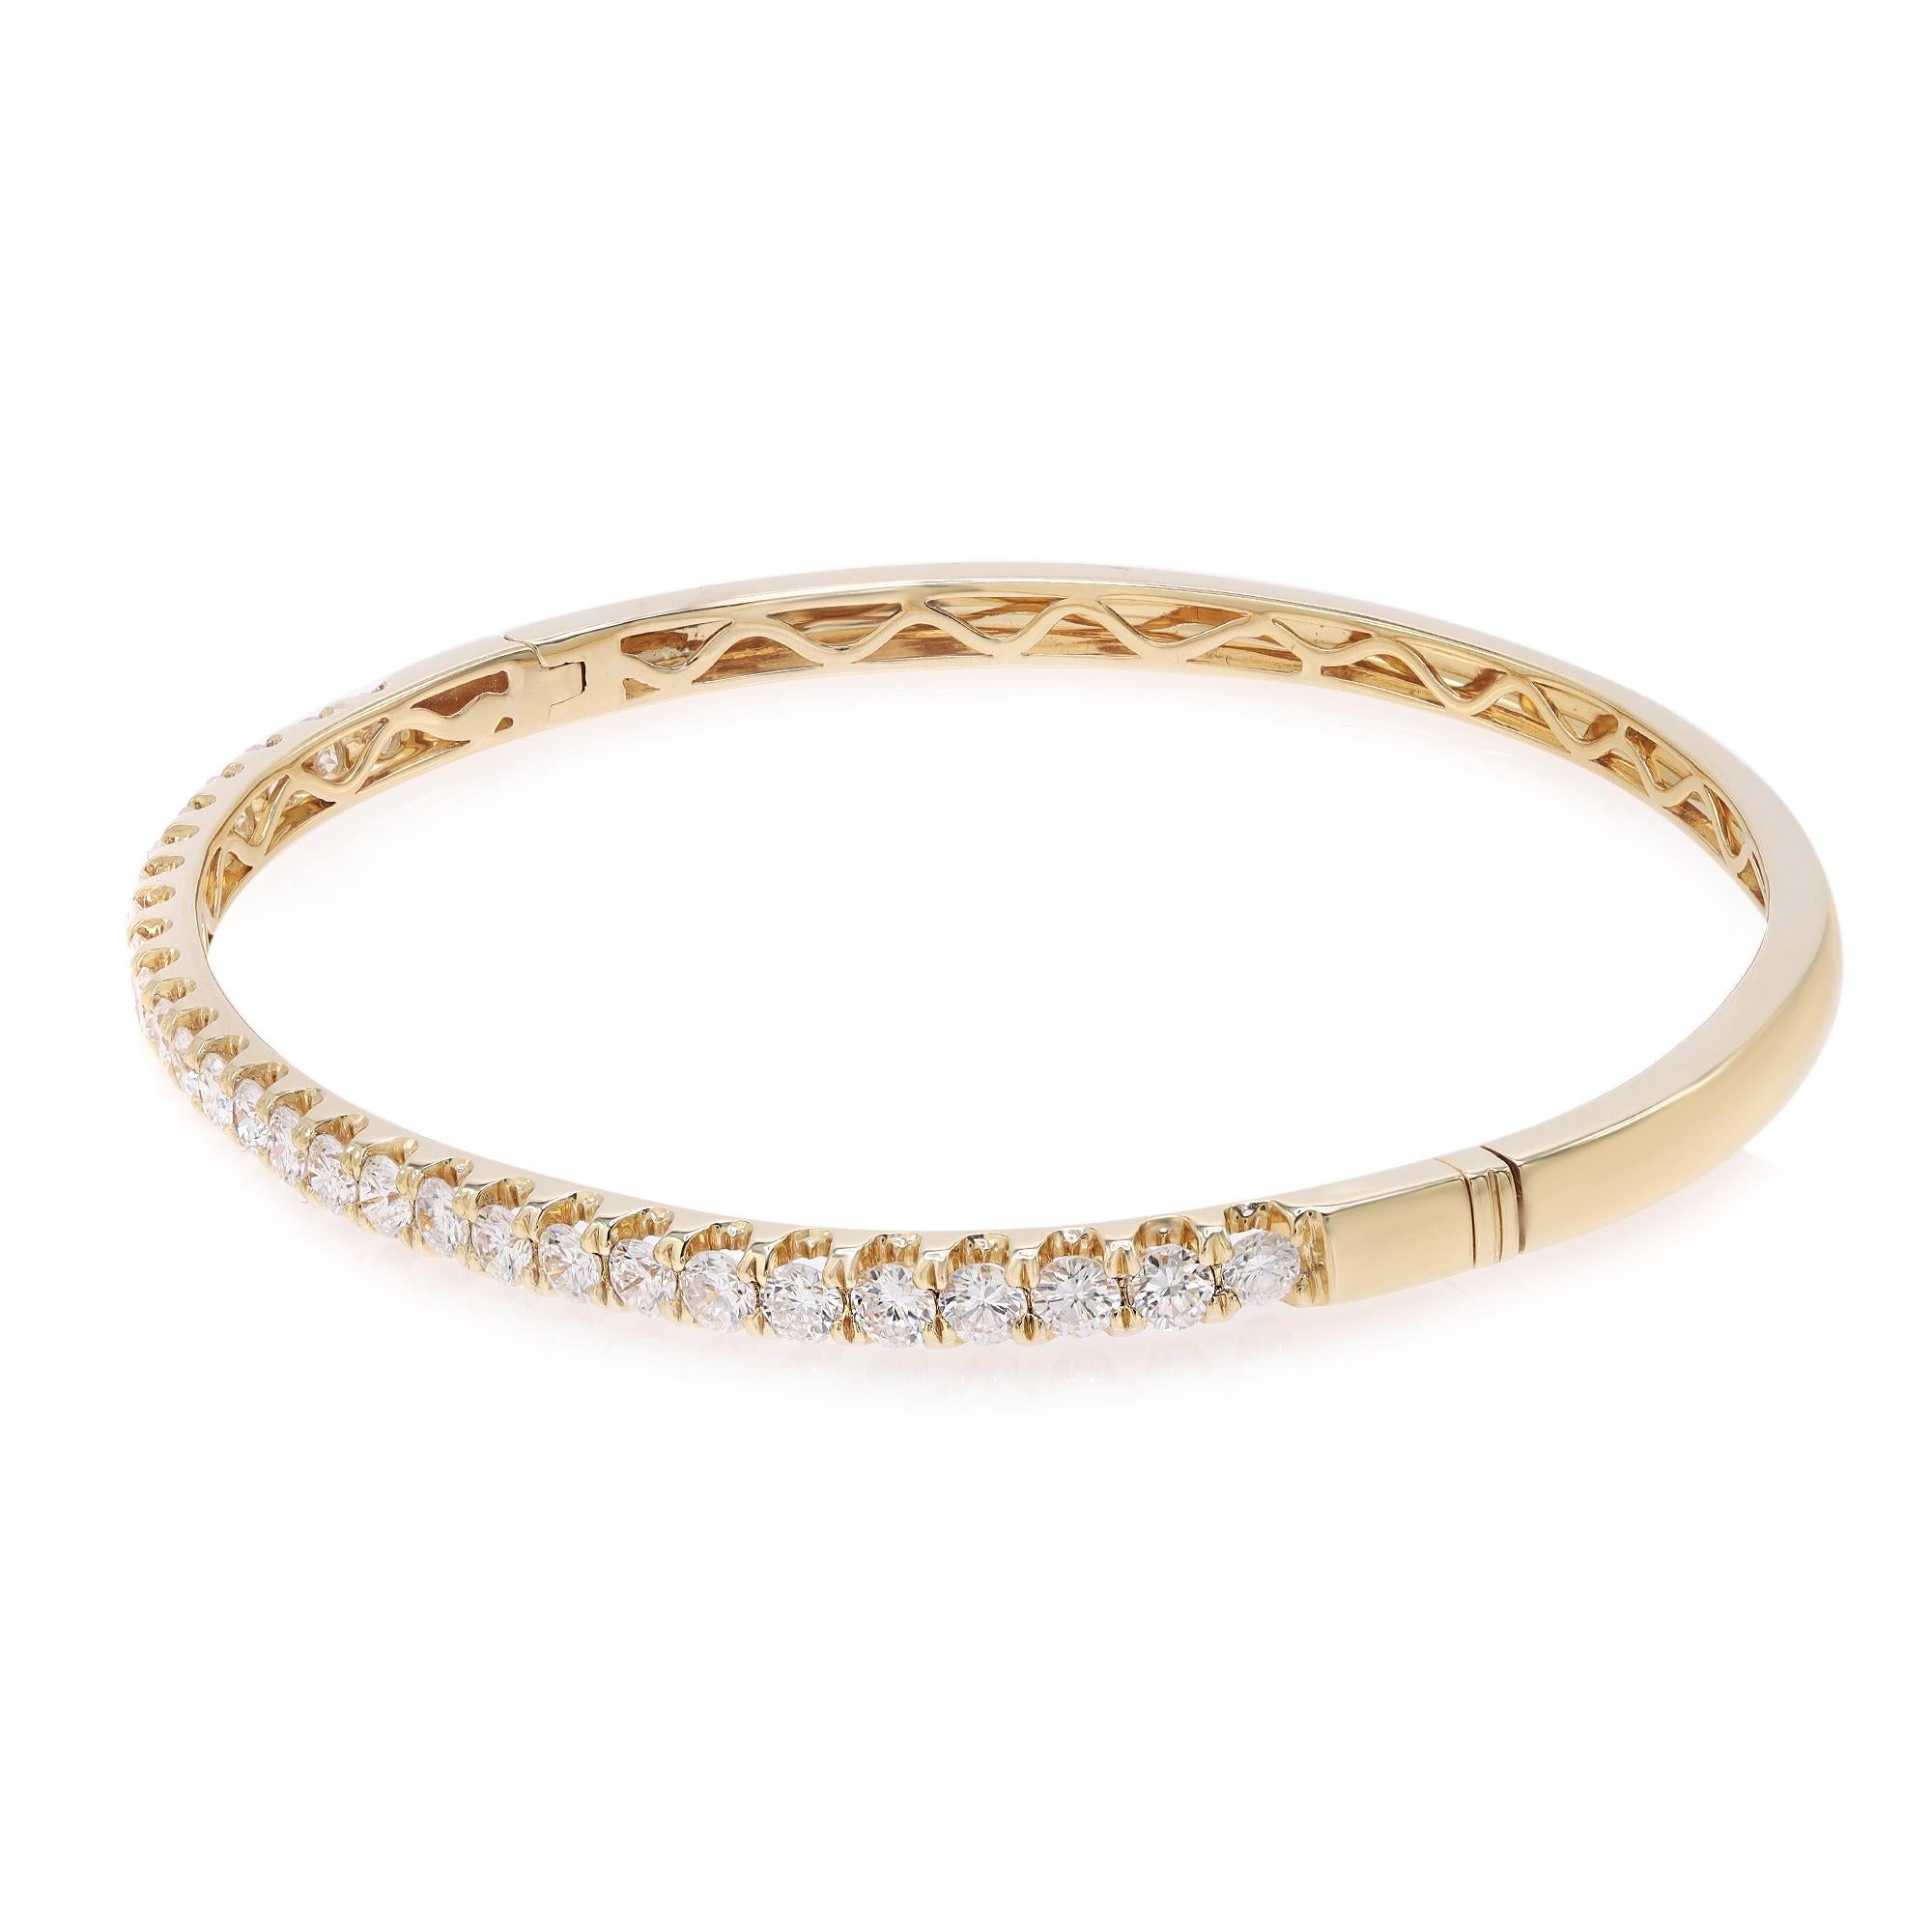 This beautifully crafted bangle bracelet features round brilliant cut diamonds encrusted halfway through the bangle in four prong setting. Crafted in 18k yellow gold. Total diamond weight: 2.00 carats. Diamond Quality: F-G color and SI clarity.